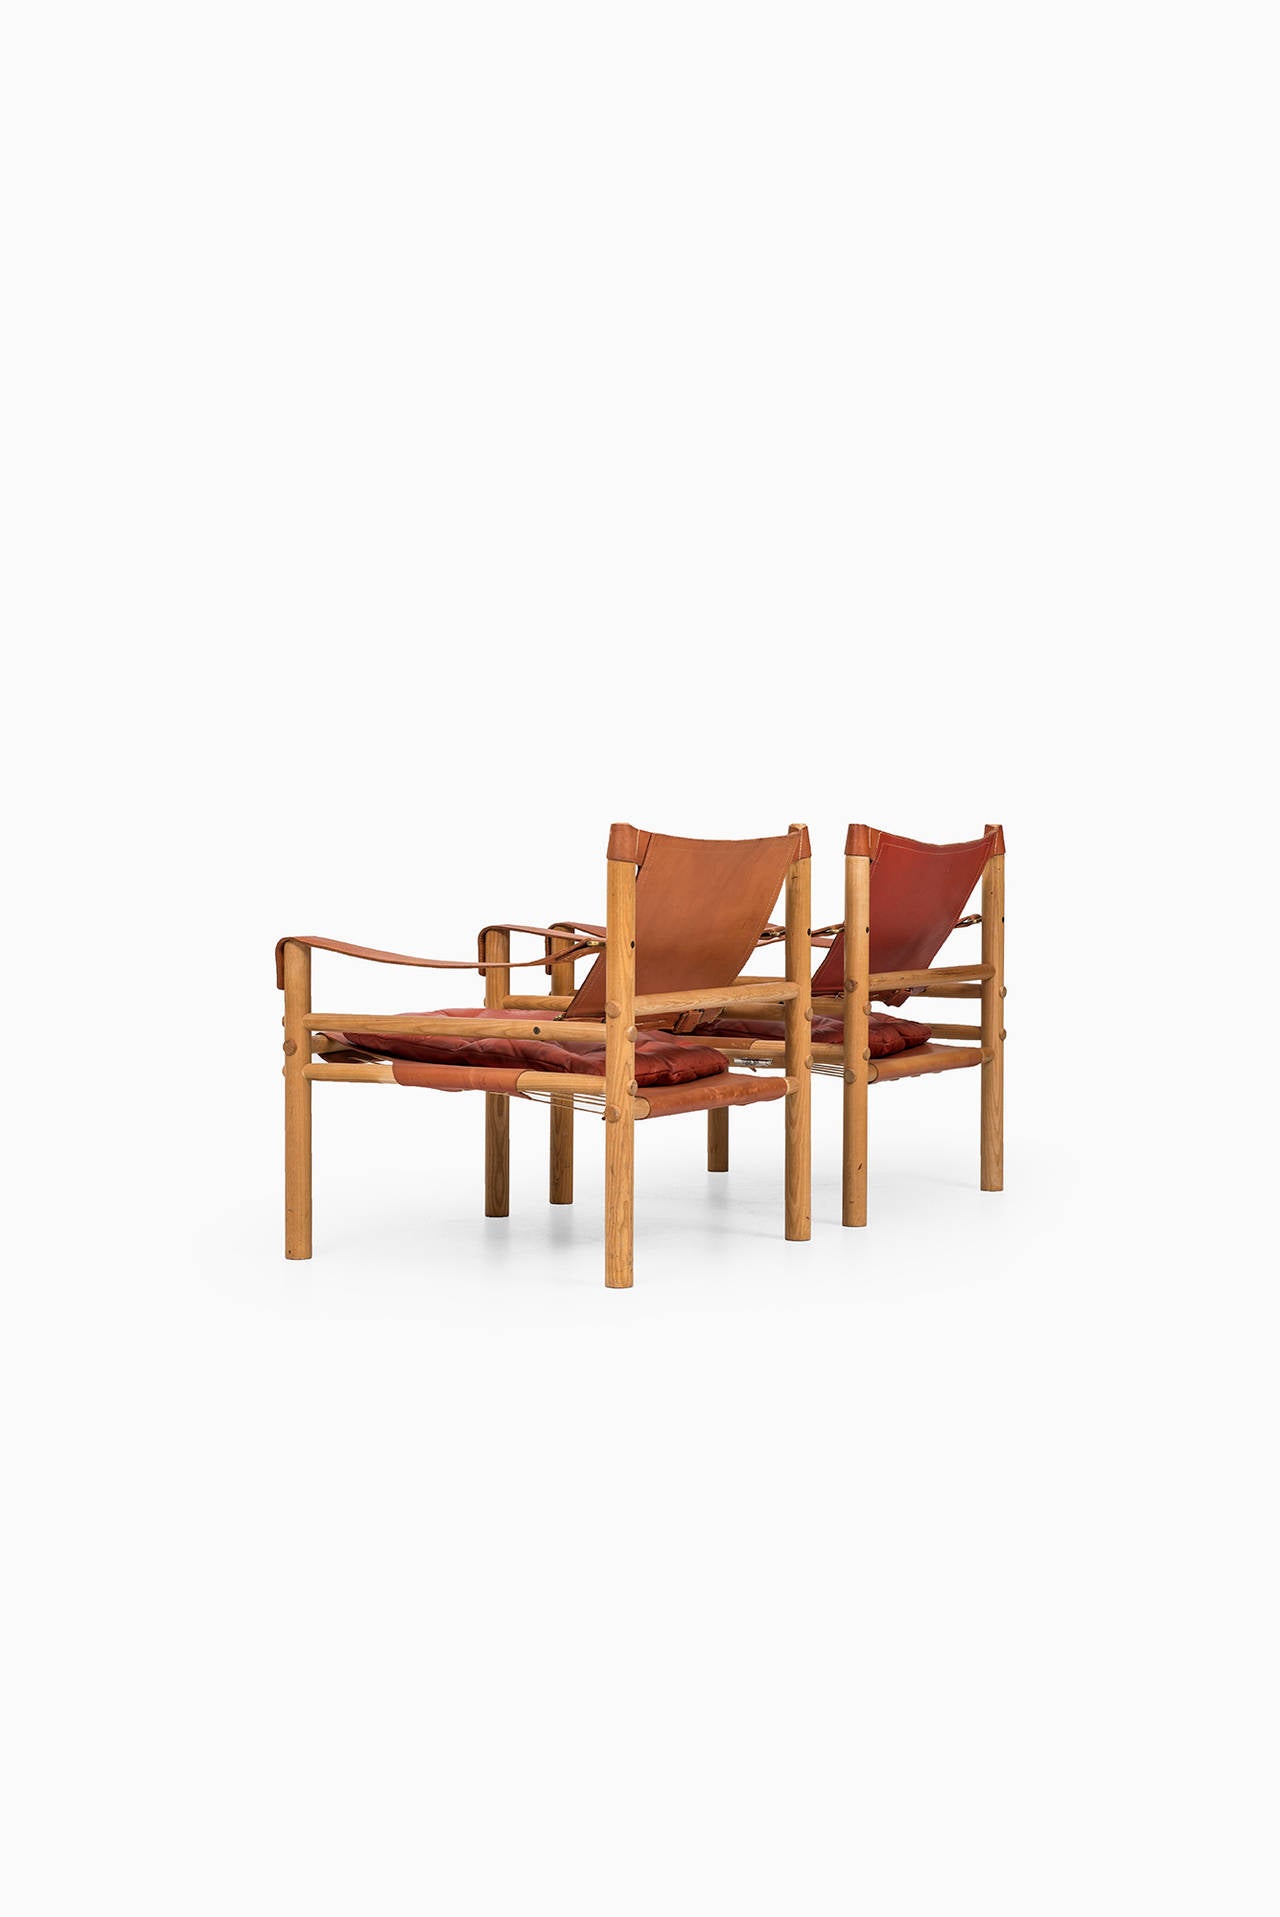 Swedish Arne Norell Sirocco Easy Chairs by Norell AB in Sweden